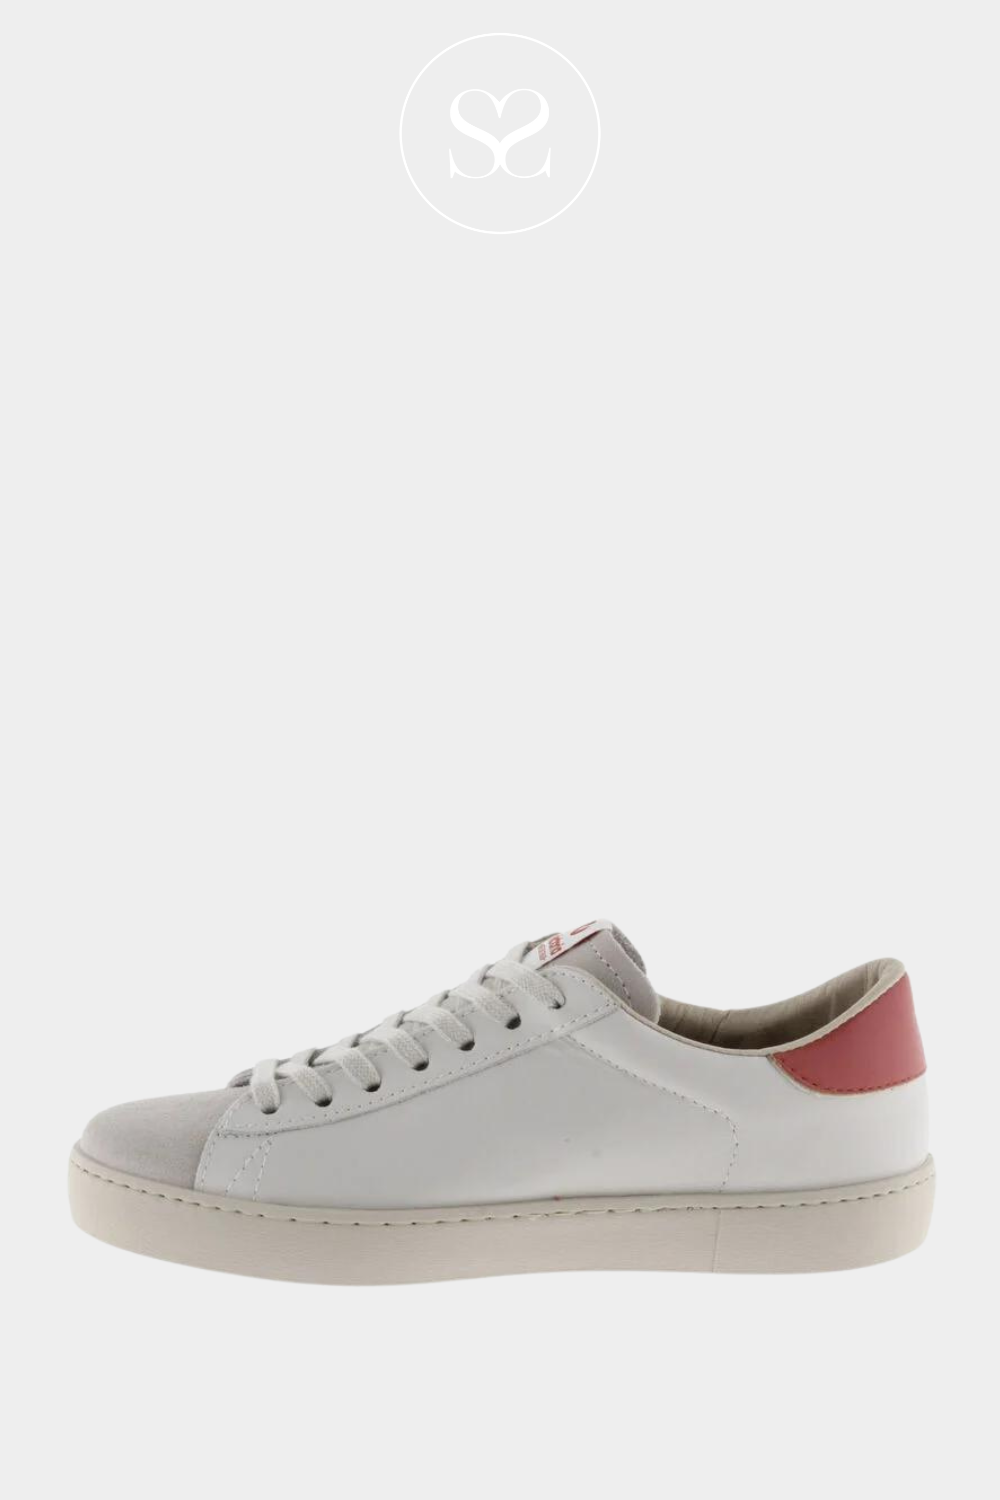 VICTORIA 1-126142 WHITE RASPBERRY TRAINERS WITH V LOGO, LACES AND SUEDE TOE